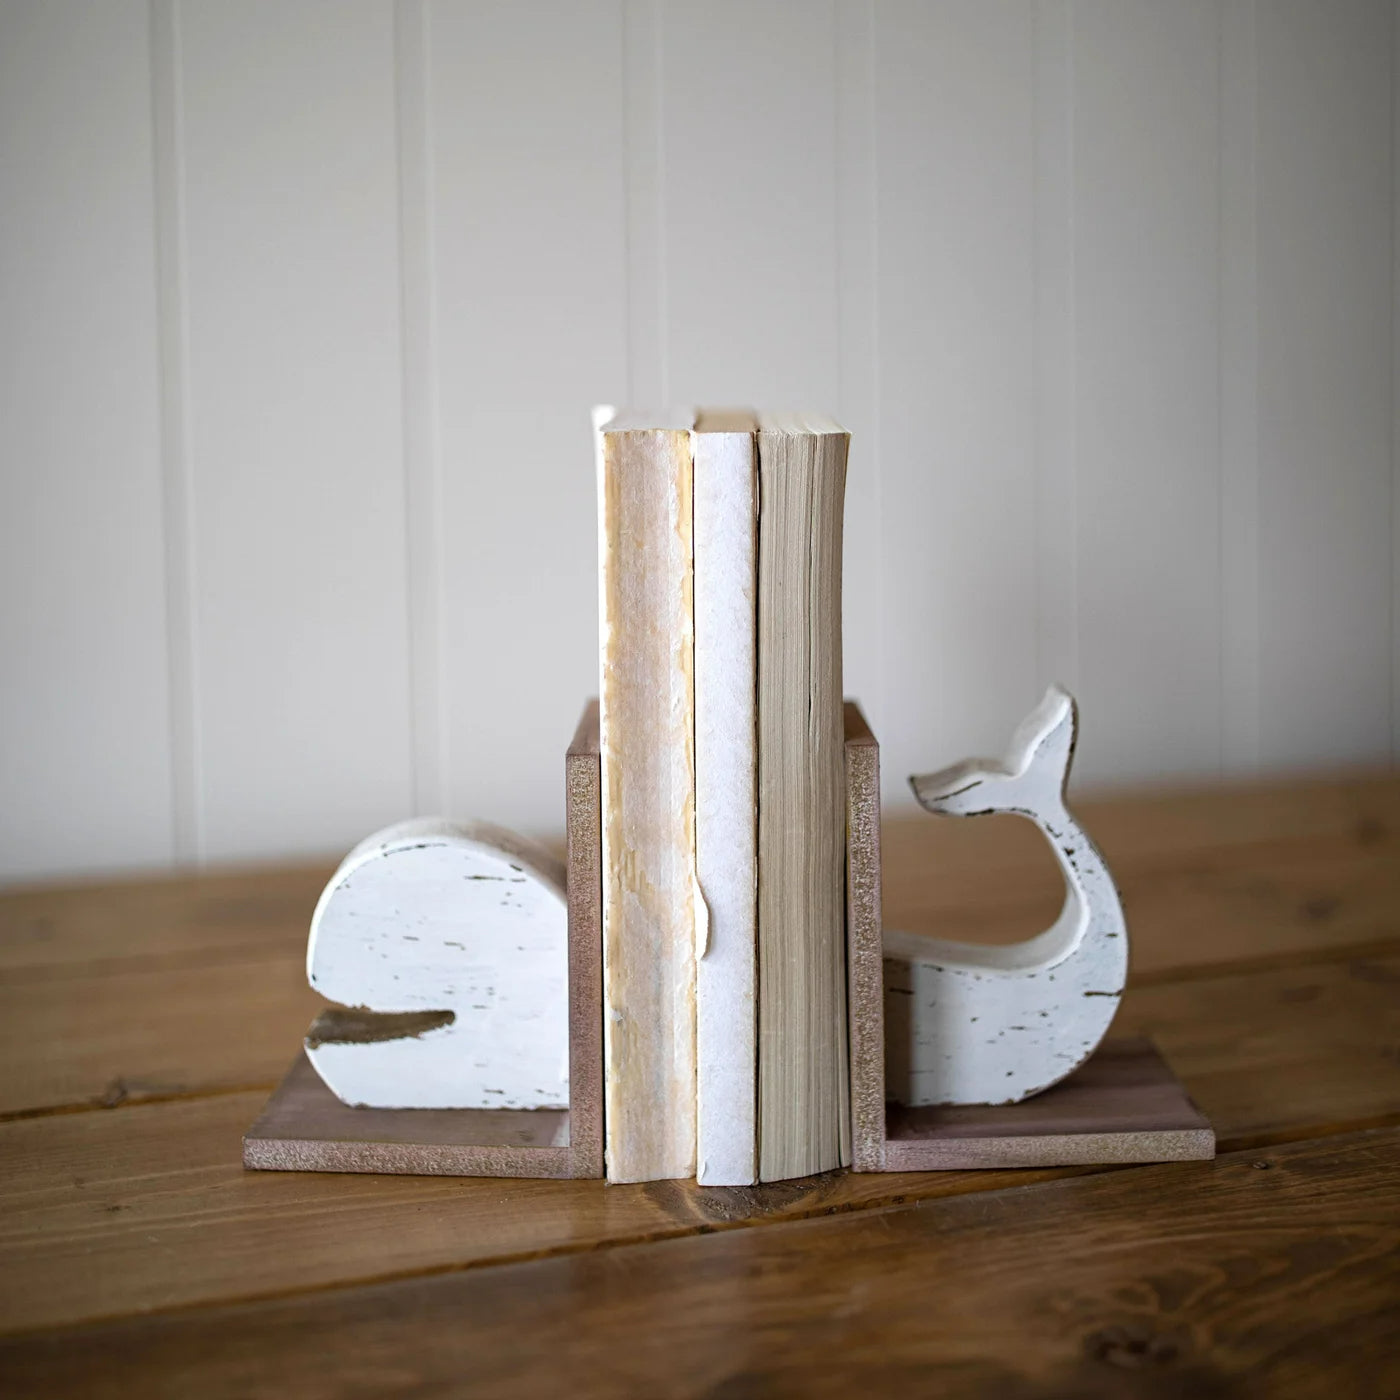 Rustic Whale Bookends